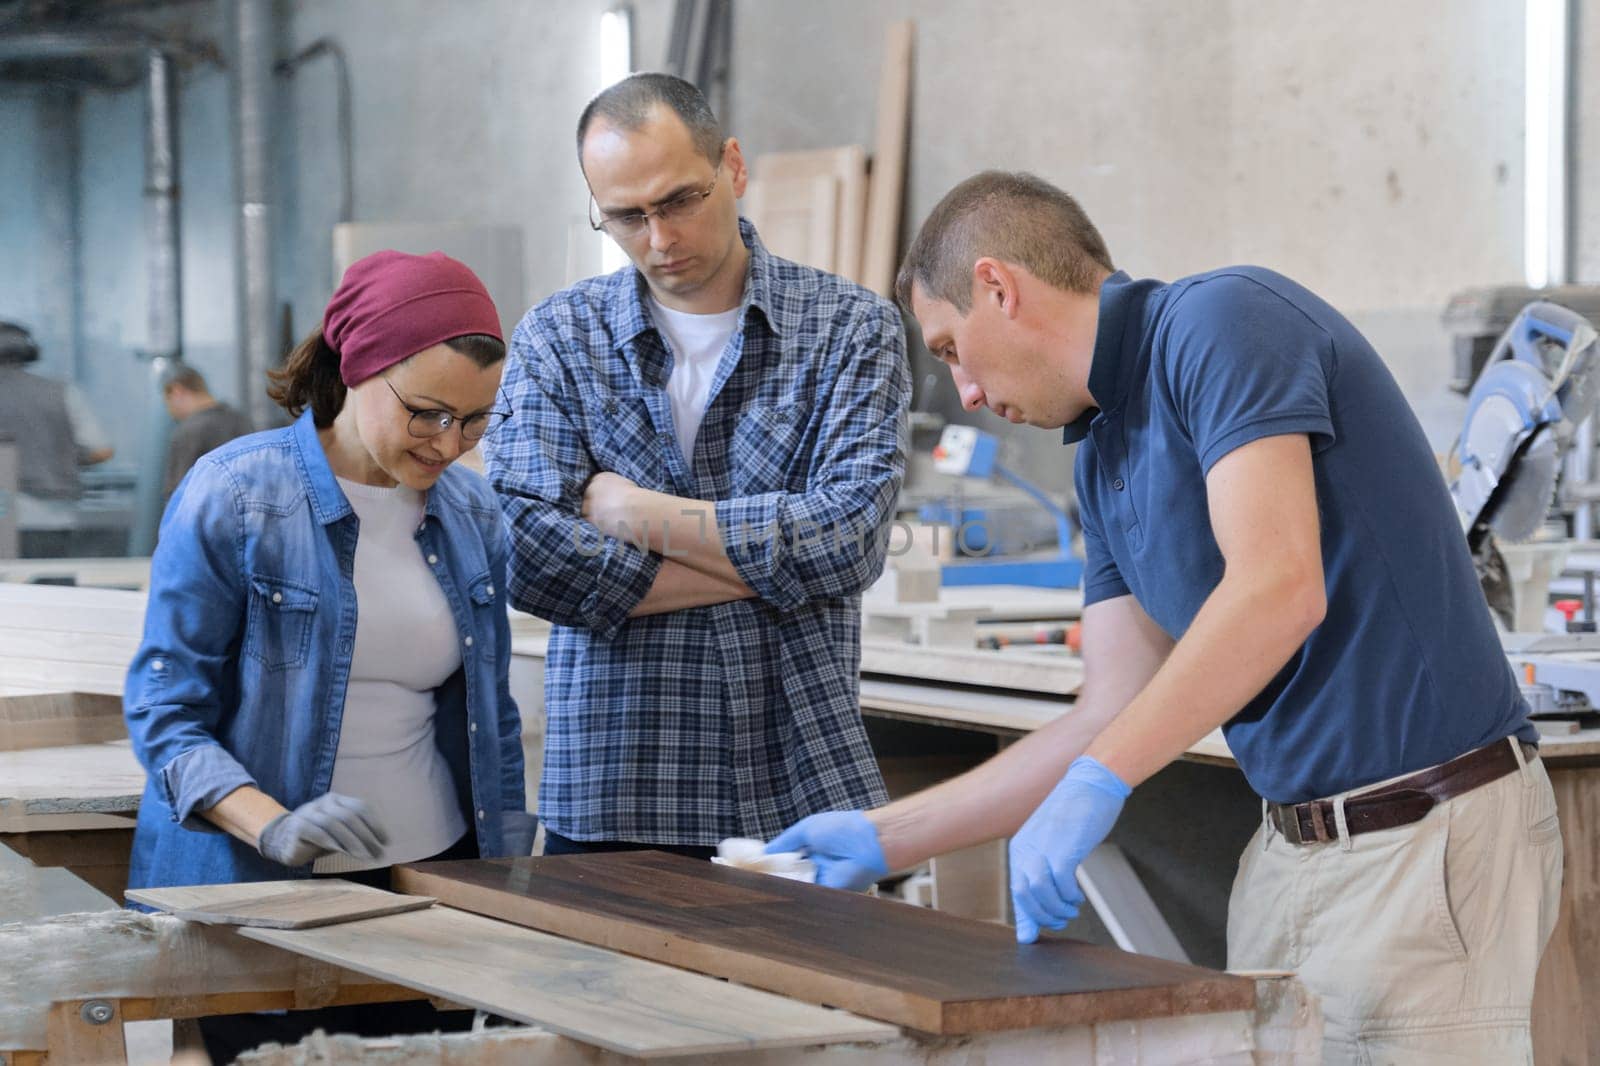 Workers in carpentry woodworking workshop, varnishing wooden plank with oil.